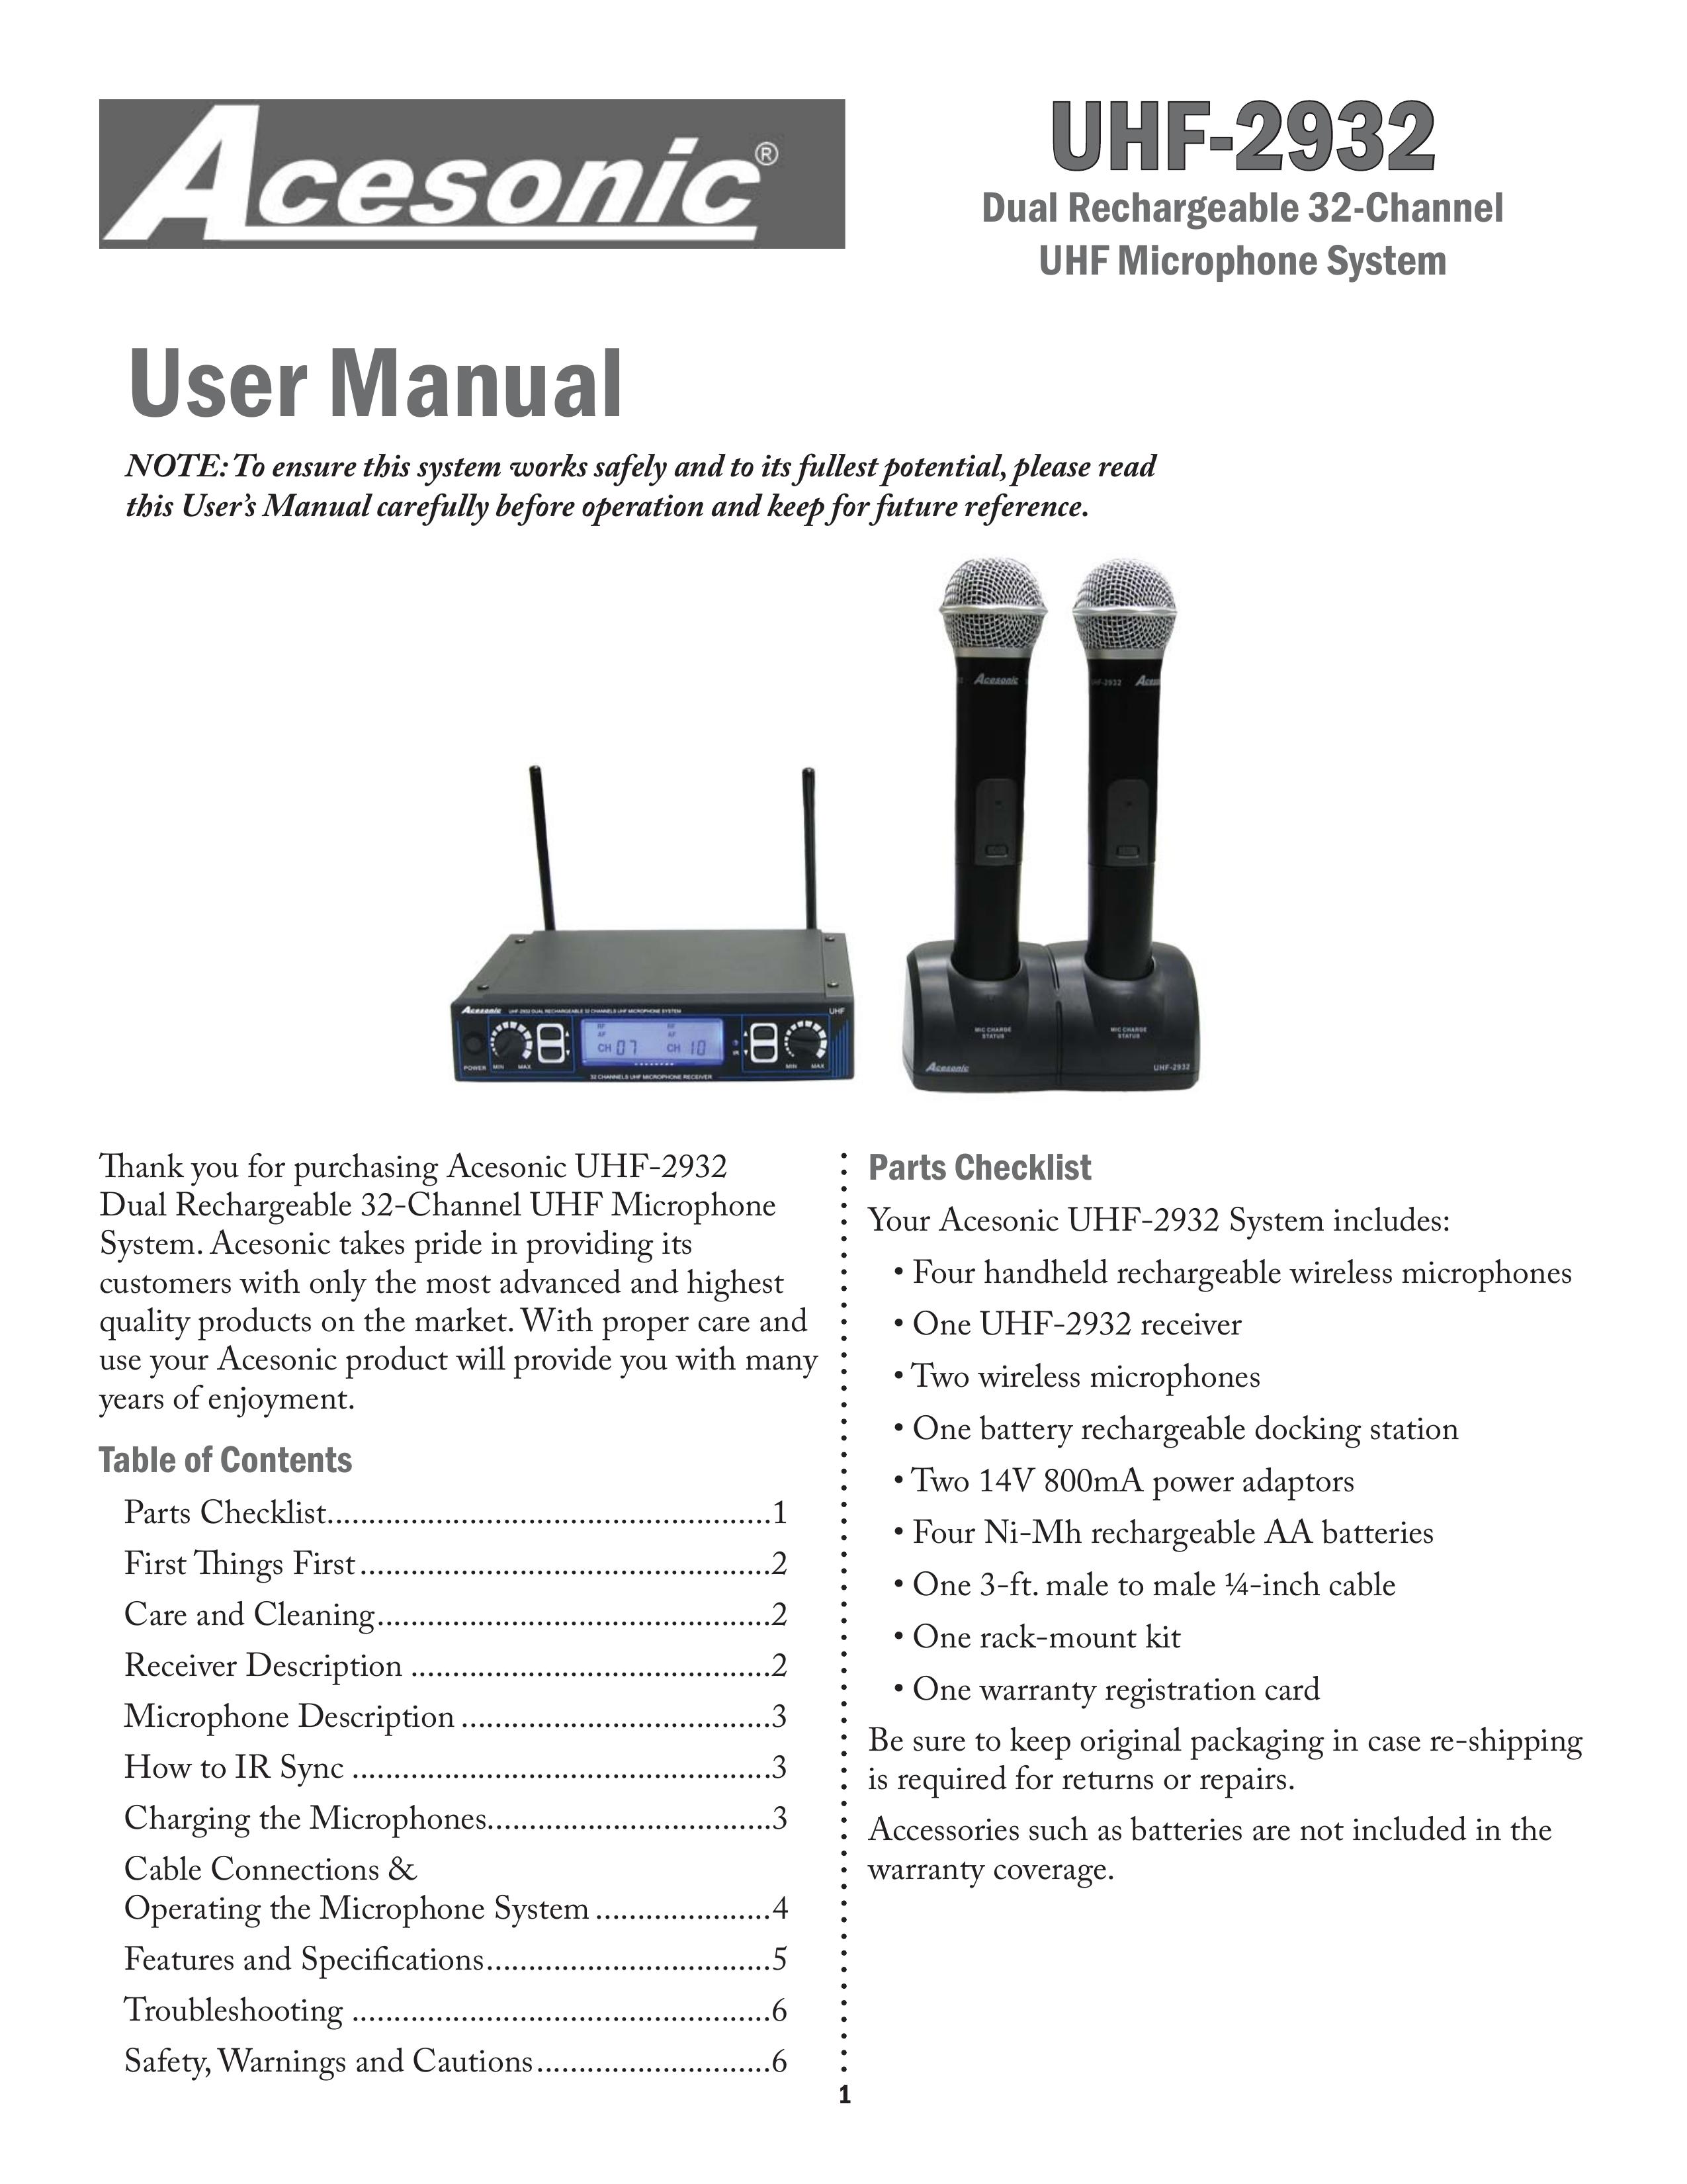 Acesonic UHF-2932 Microphone User Manual (Page 1)